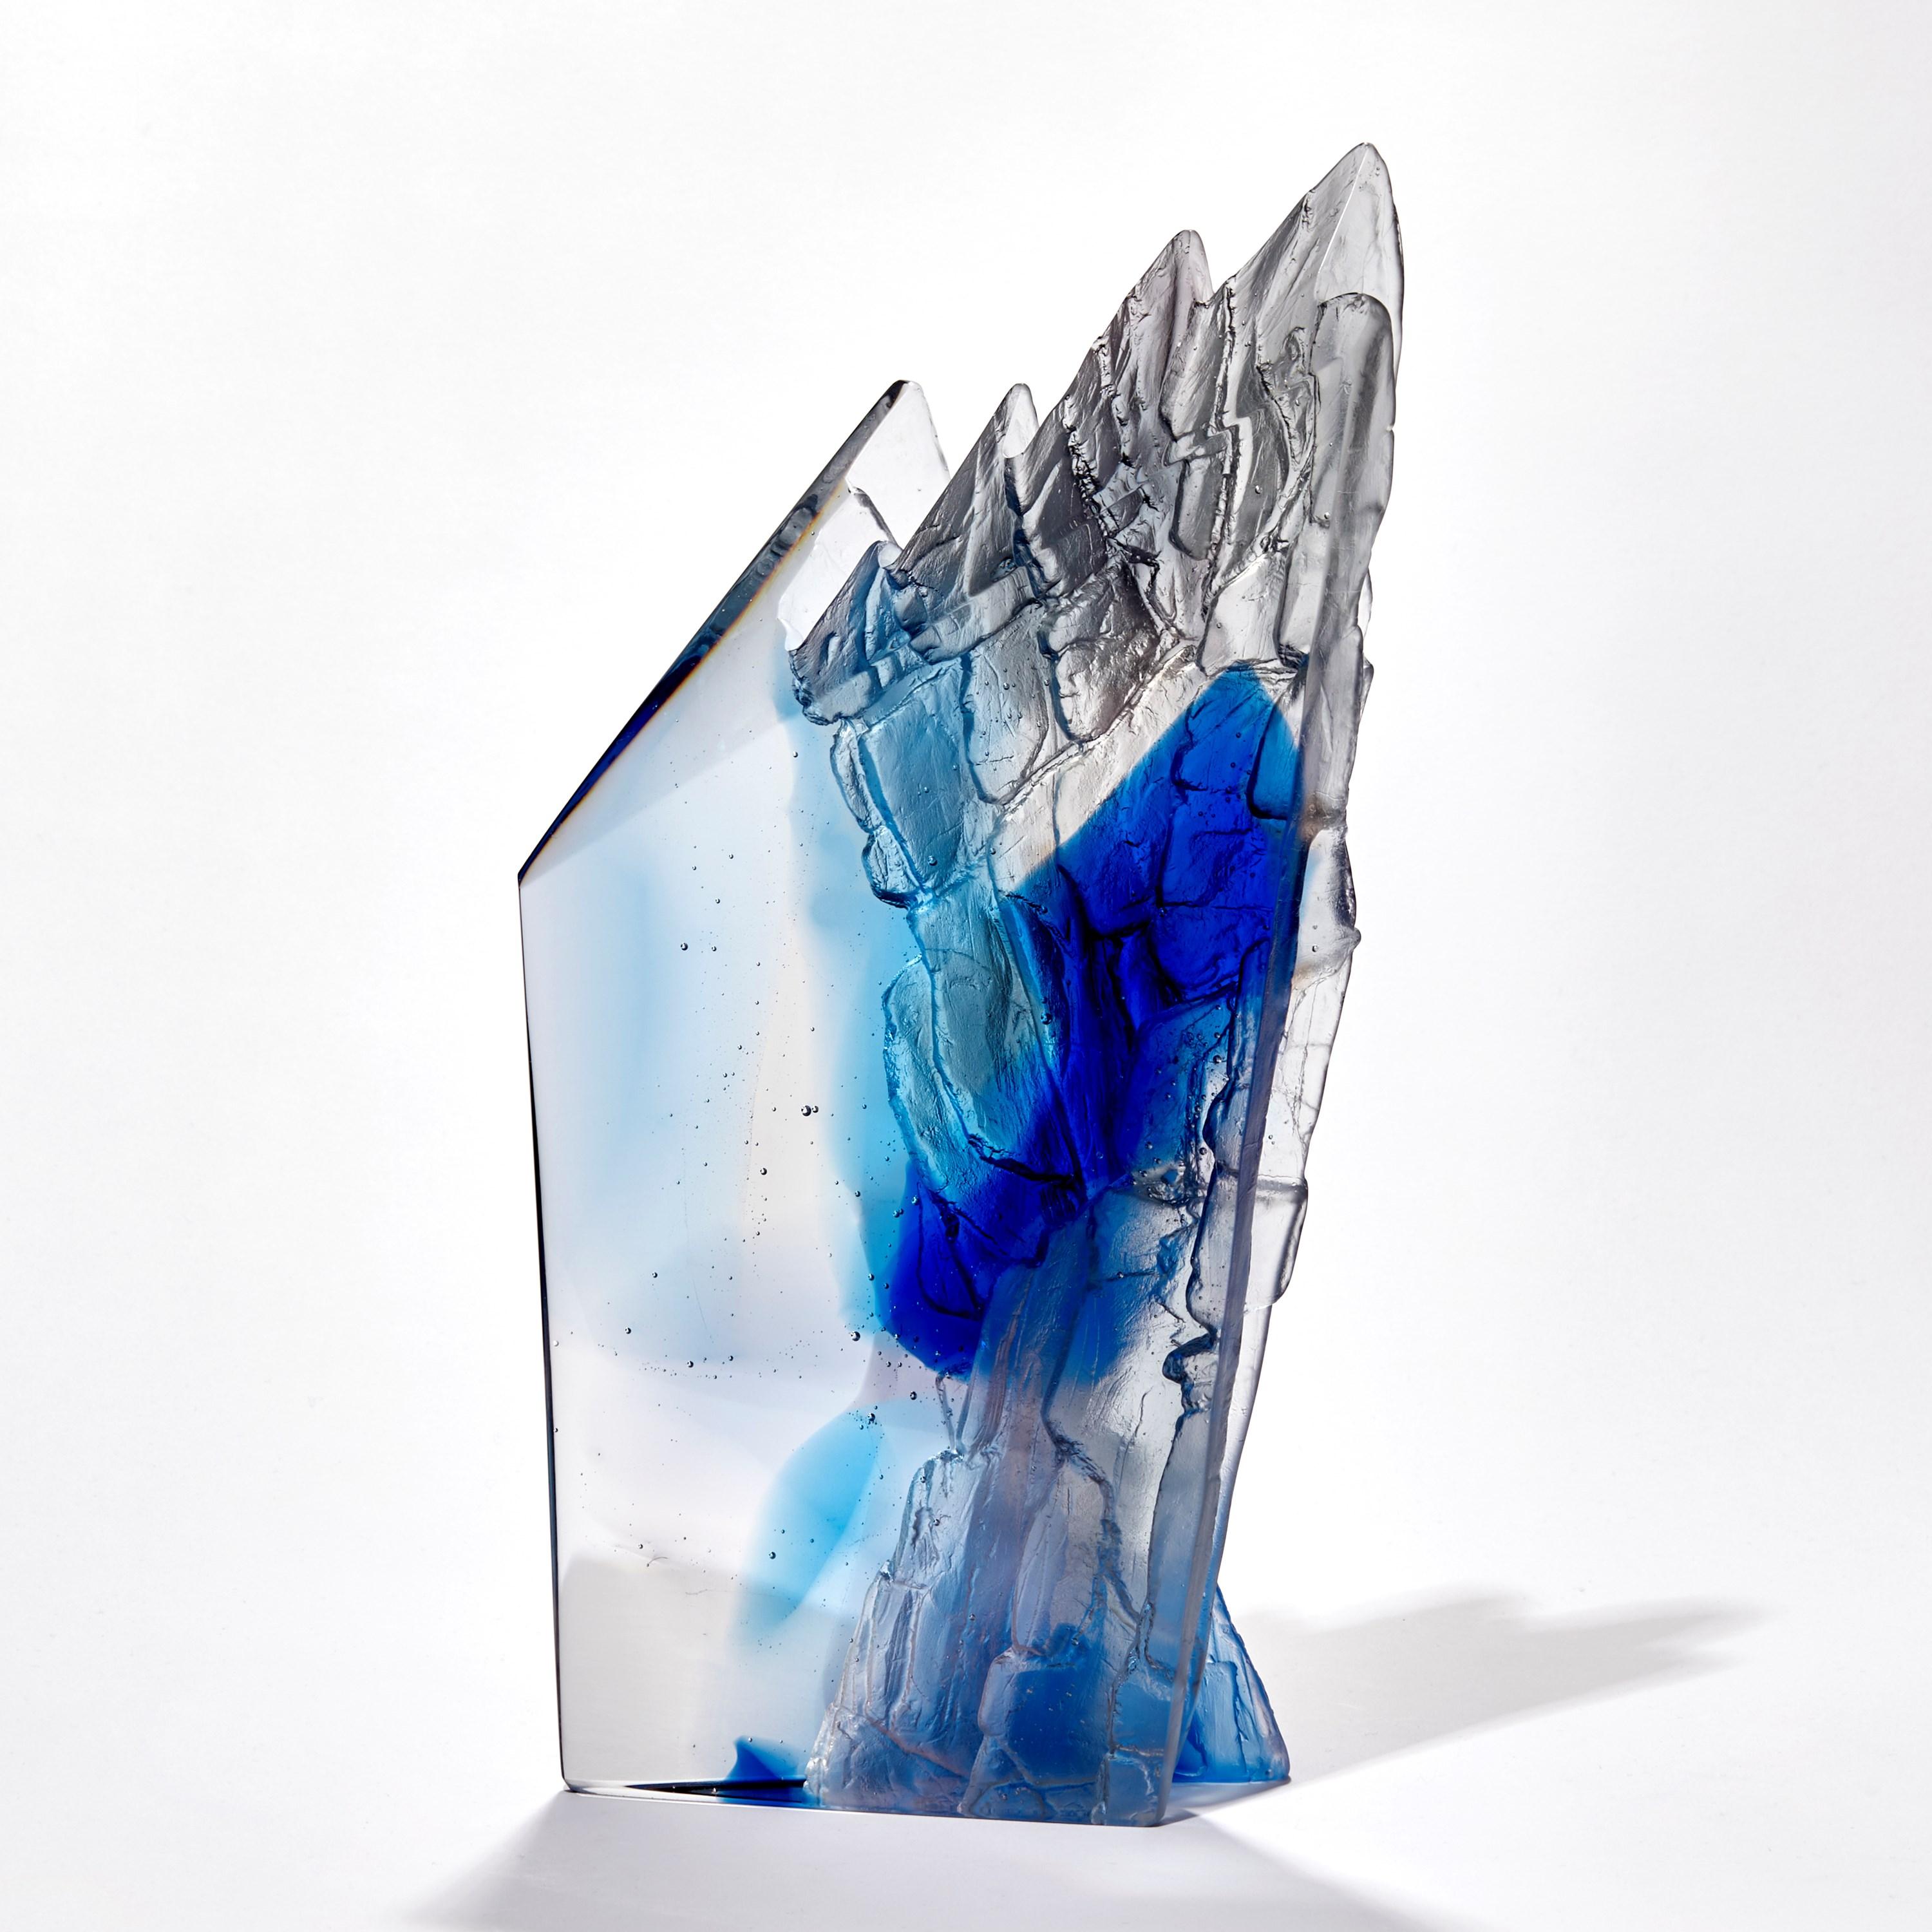 'Deep blue cliff' is a unique cast glass sculpture by the British artist, Crispian Heath.

Crispian Heath's work is predominantly inspired by landscape and his love for exploring the rugged cliffs and other geological sites which are unique to